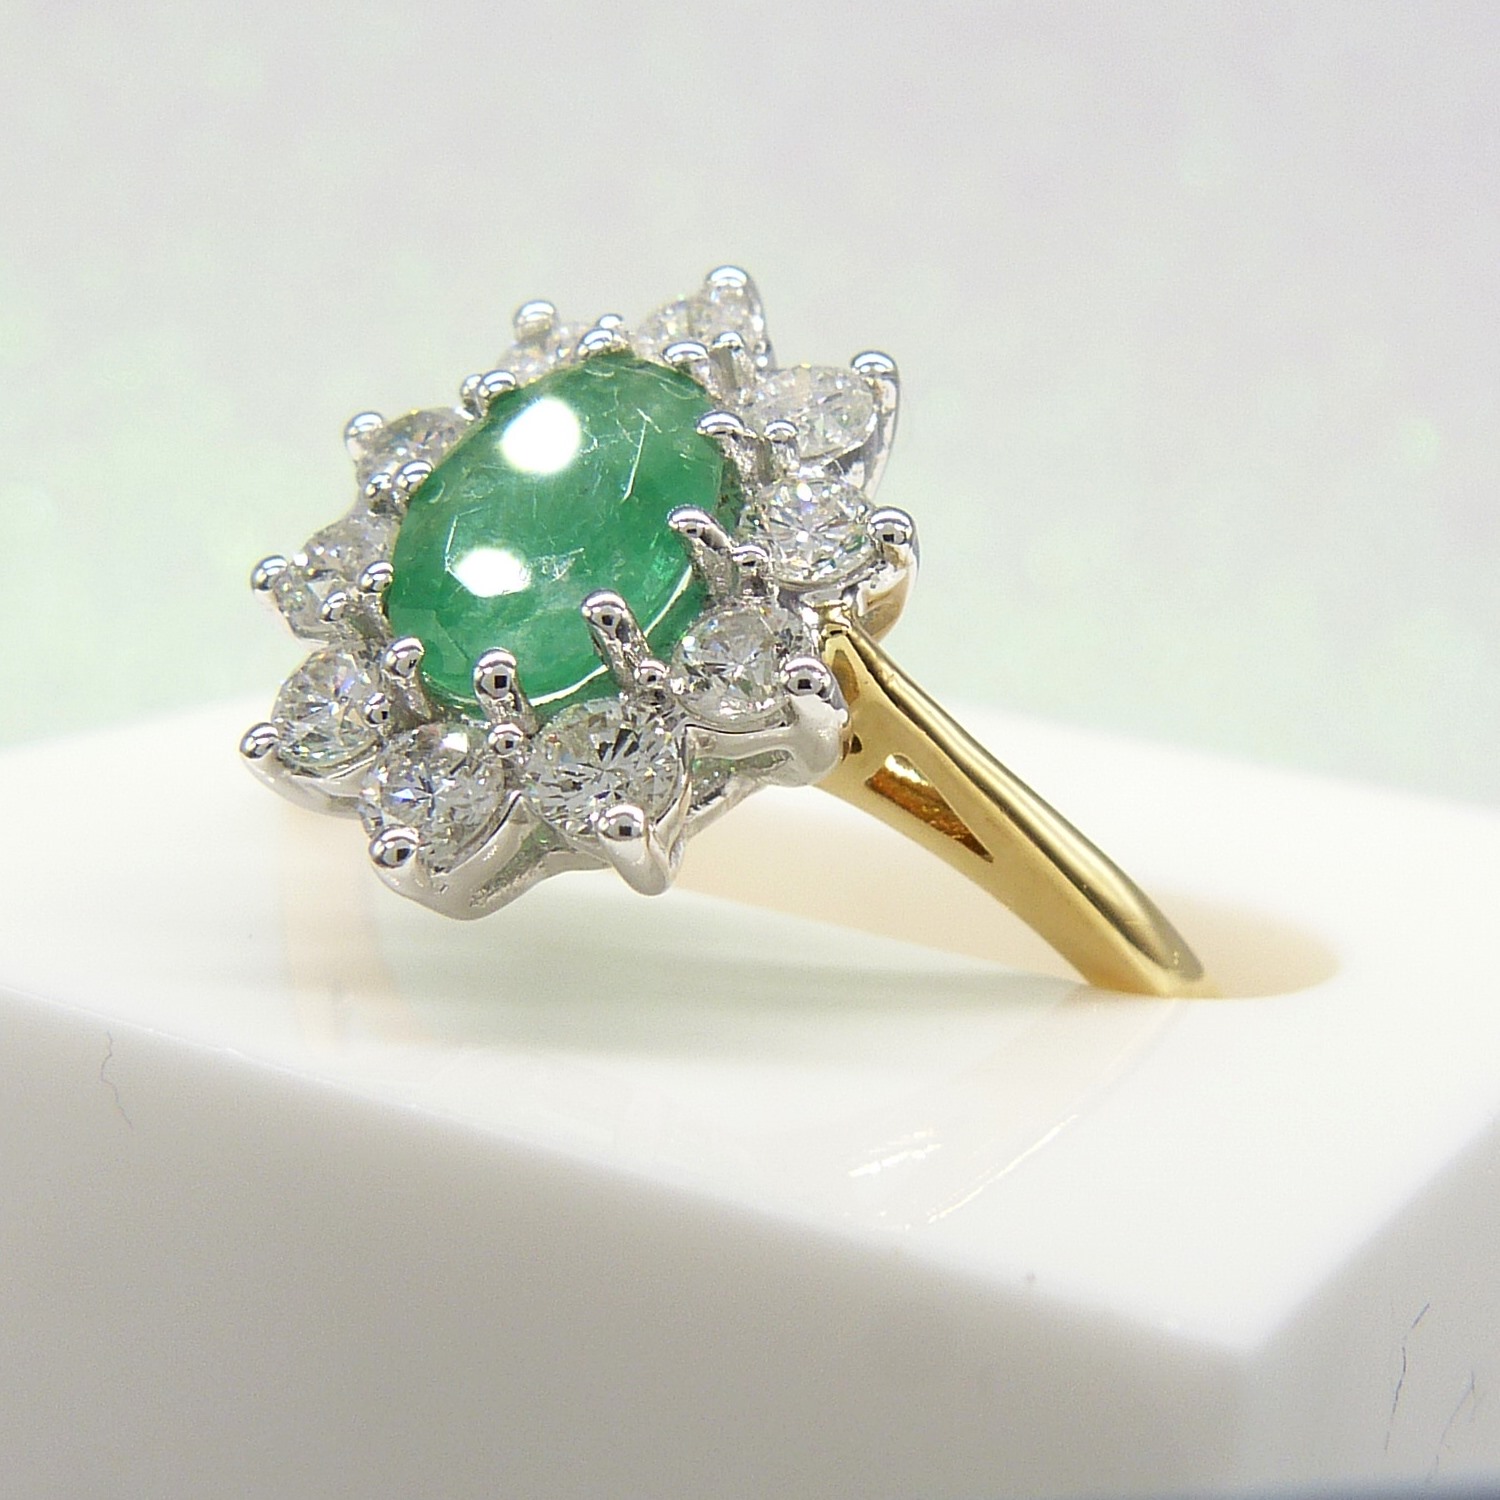 Certificated 18ct Yellow and White Gold Emerald and Diamond Cluster Ring - Image 2 of 7